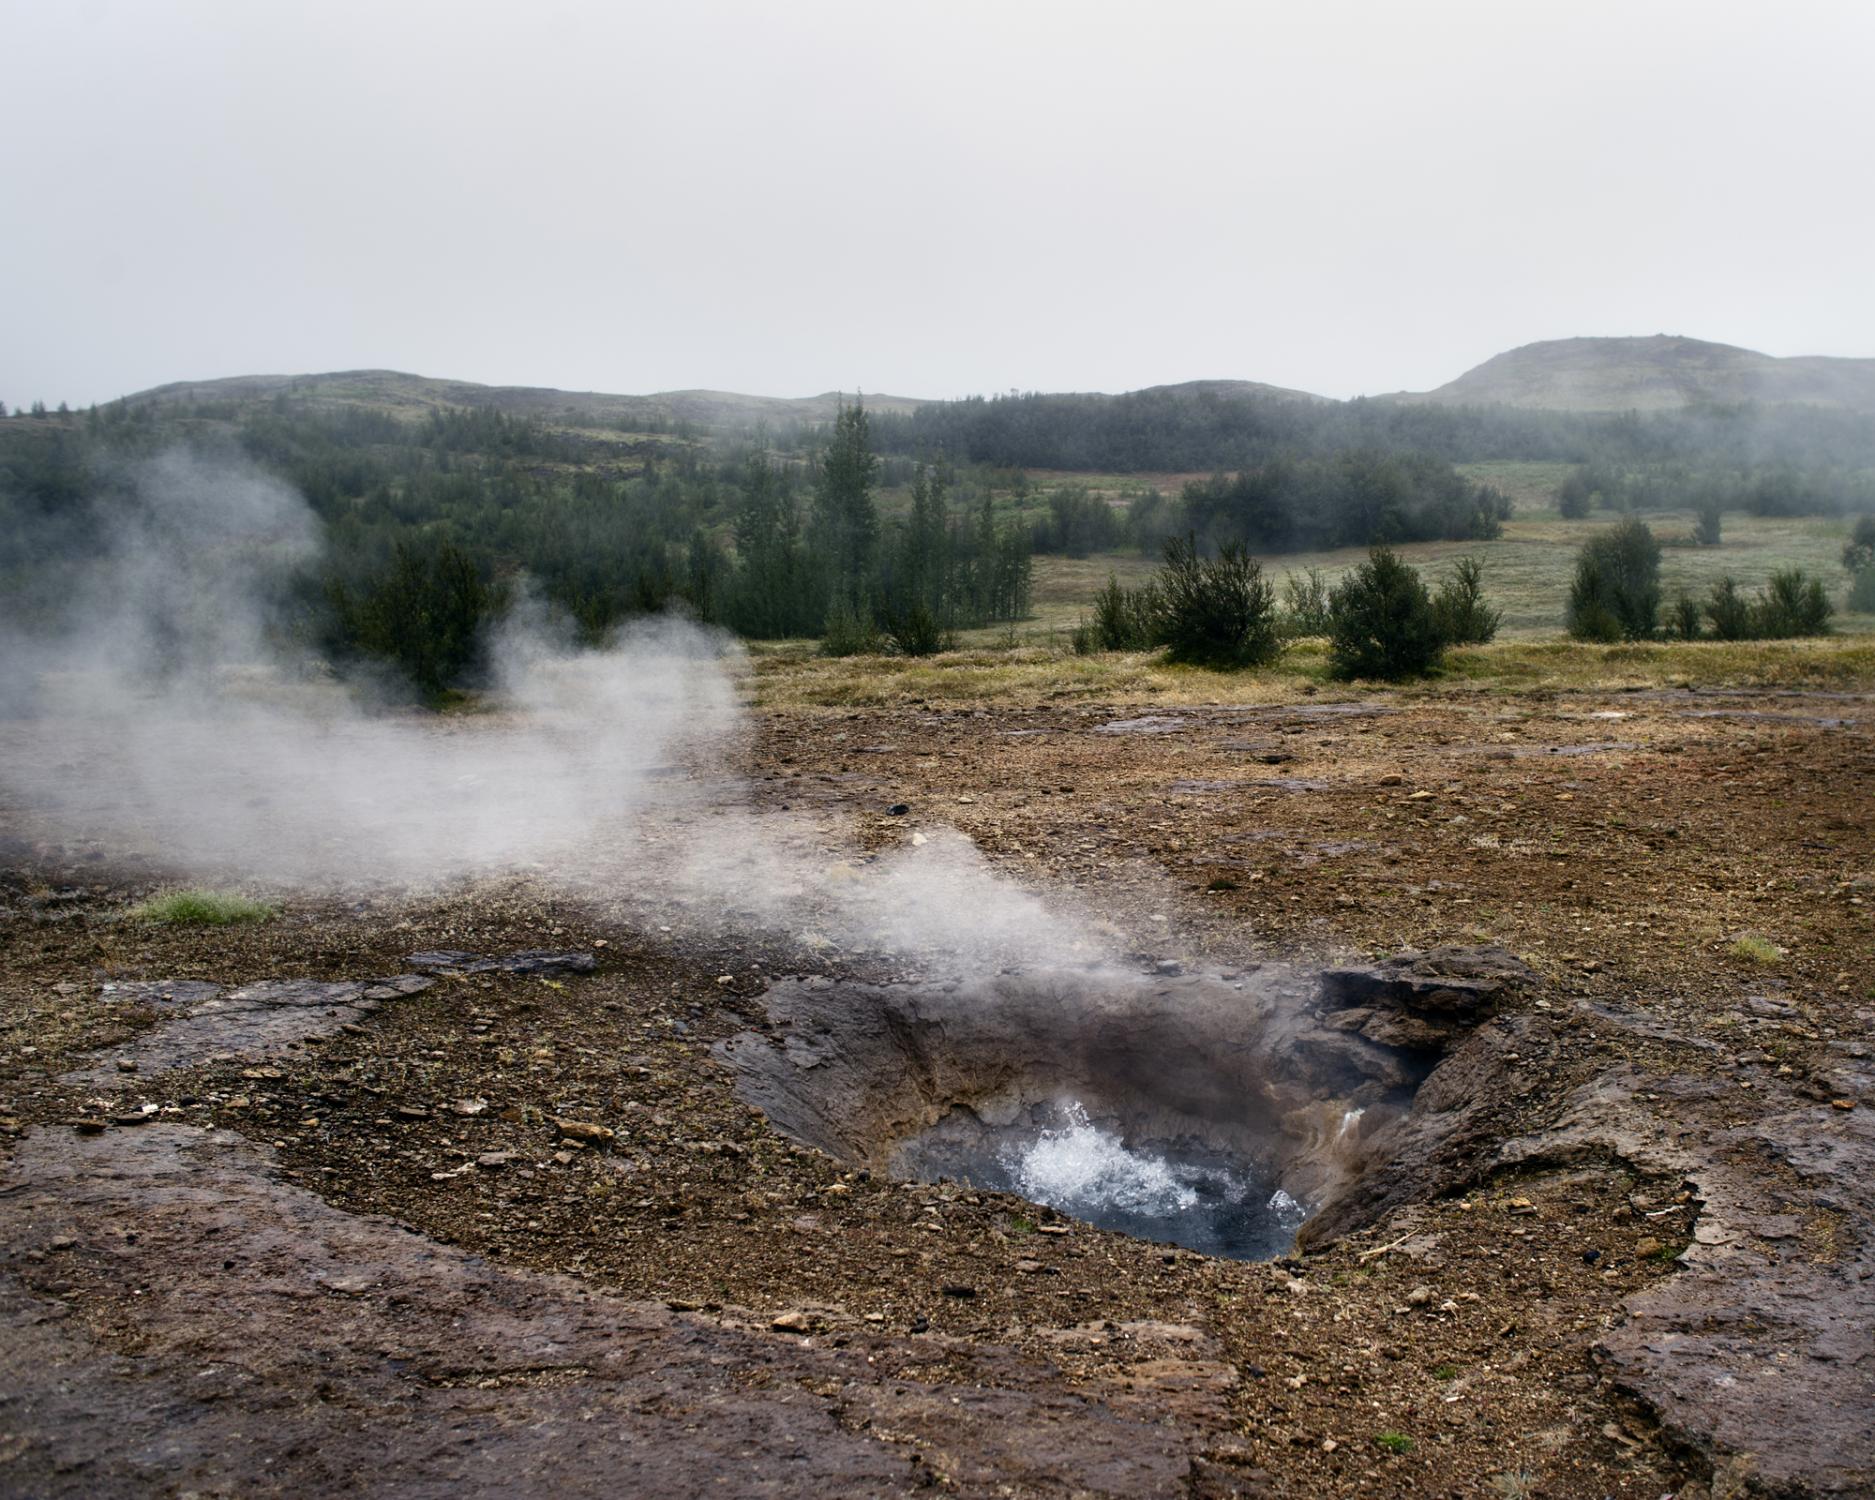 Geothermal Power in Iceland. August 2010. Iceland. Gullfoss Geysir hot spring area. Geothermal energy is the heat energy that occurs naturally in...